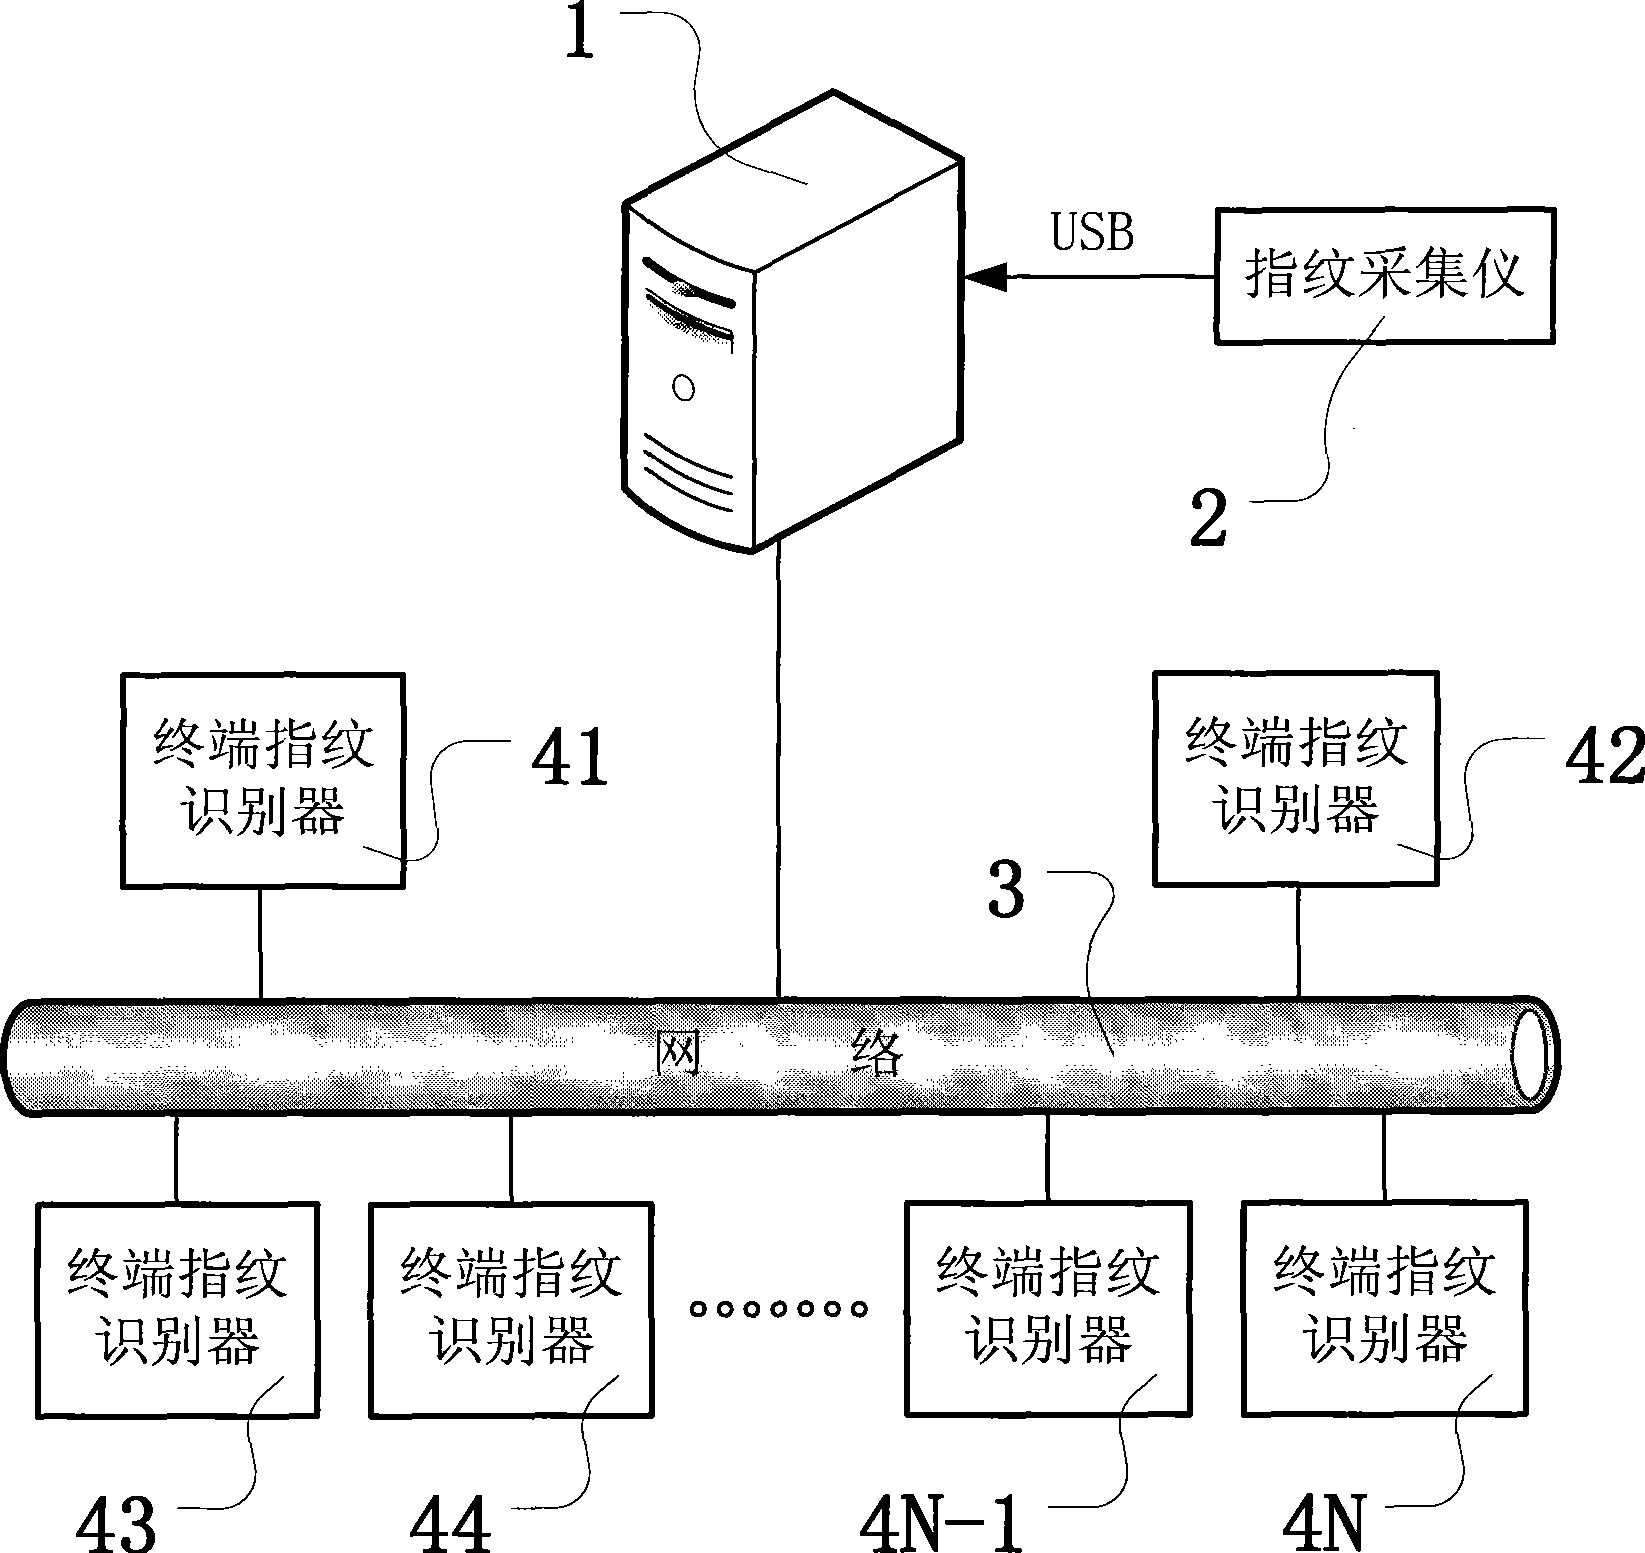 Distributed finger print recognition system for network and implementing method thereof